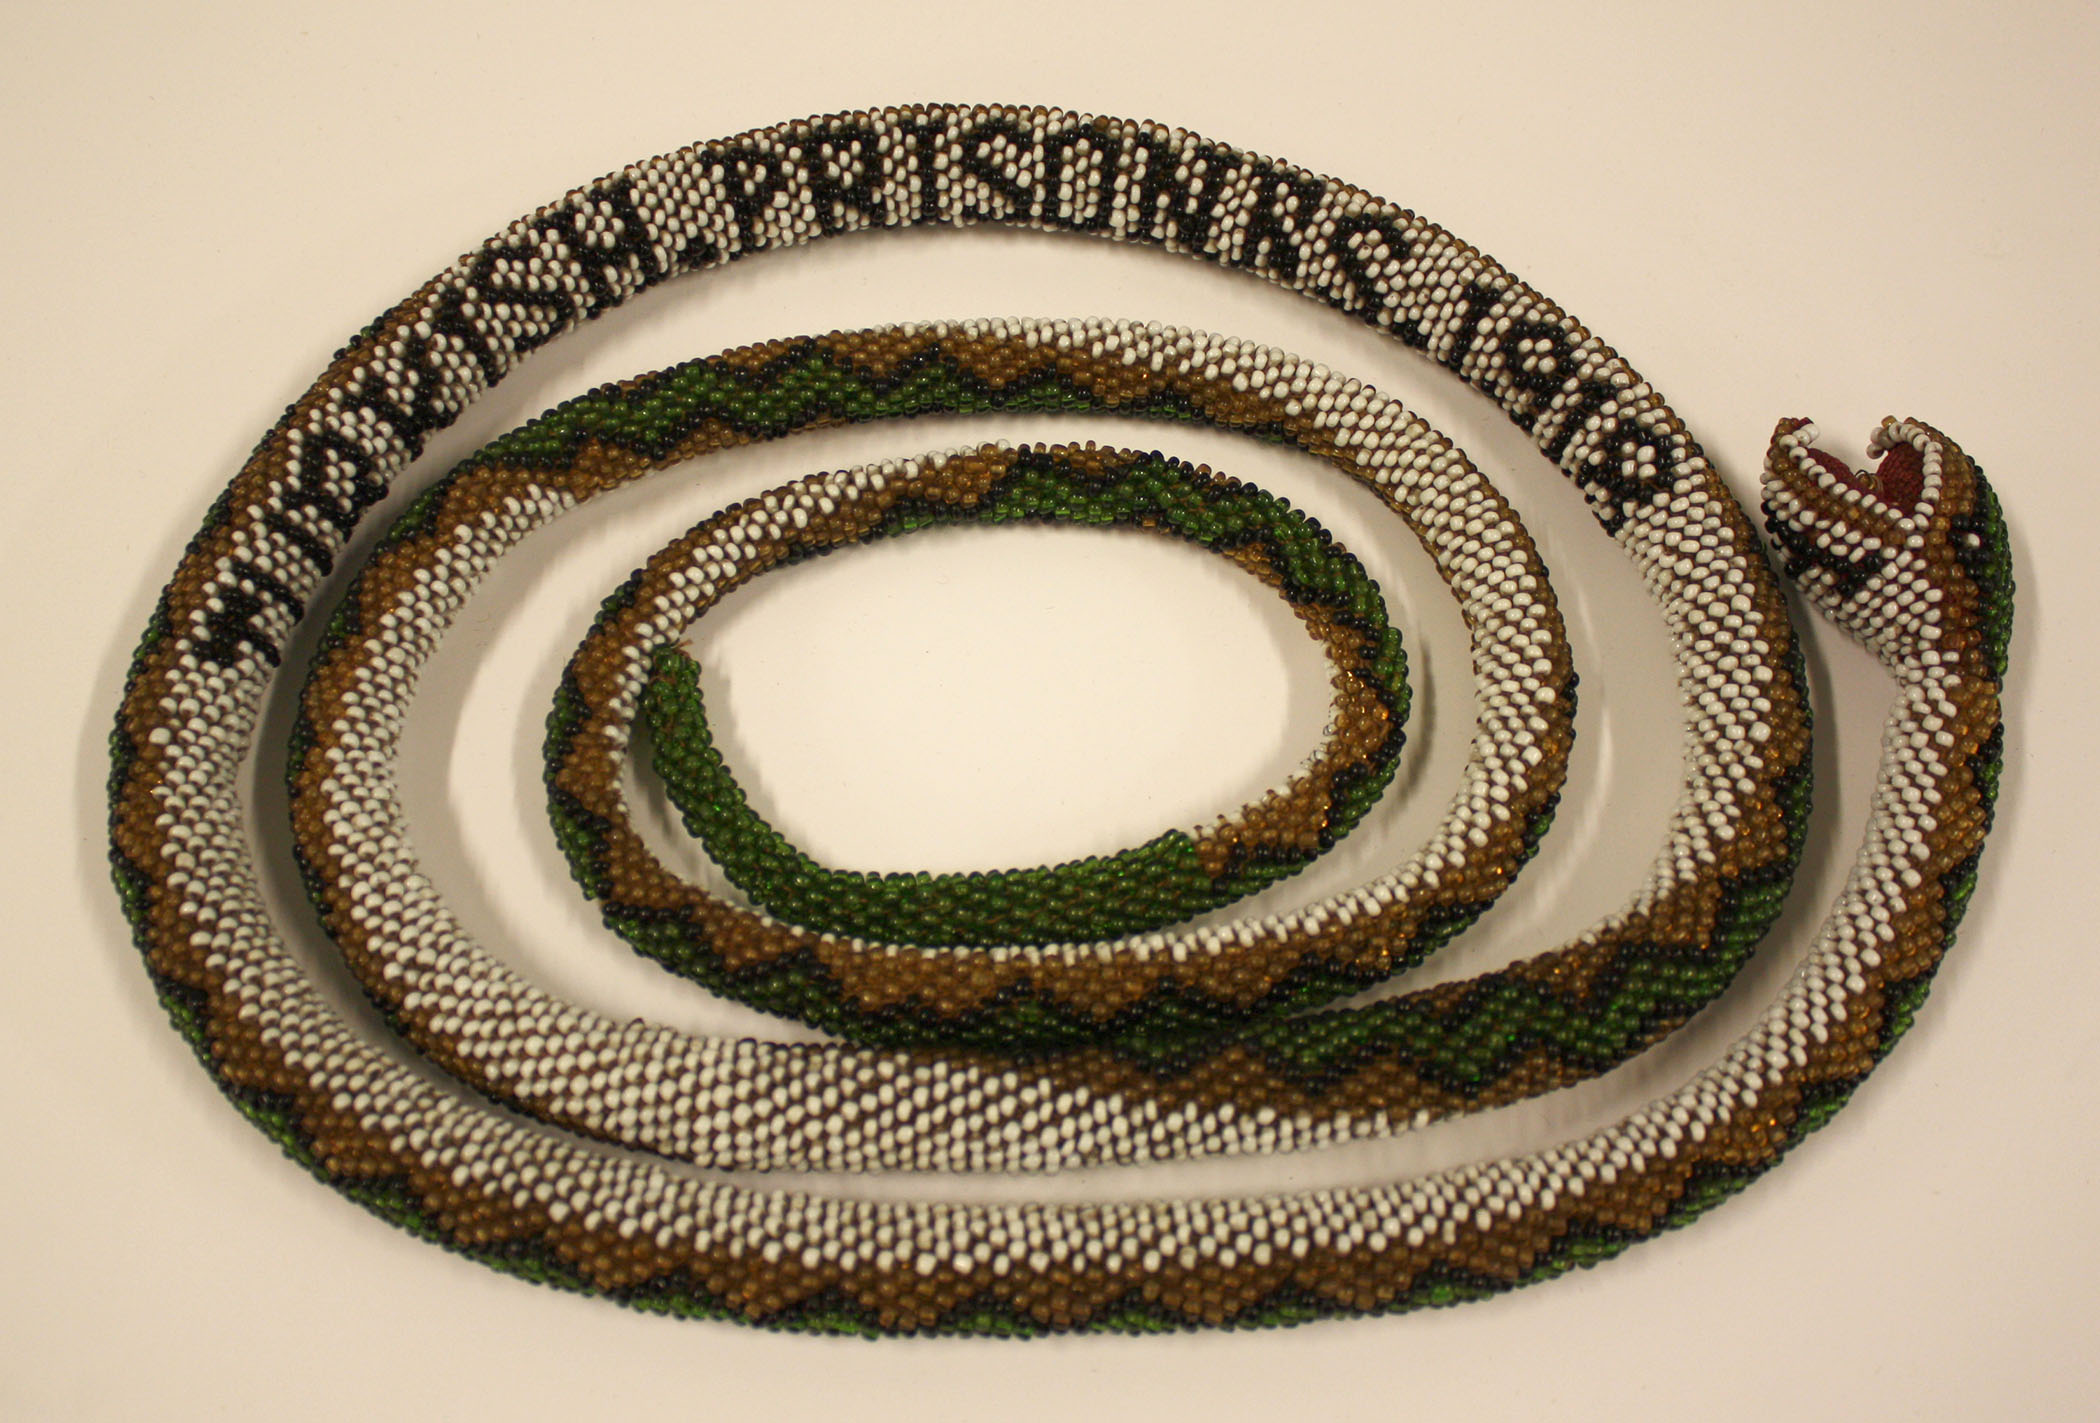 Photograph of a beaded cloth snake